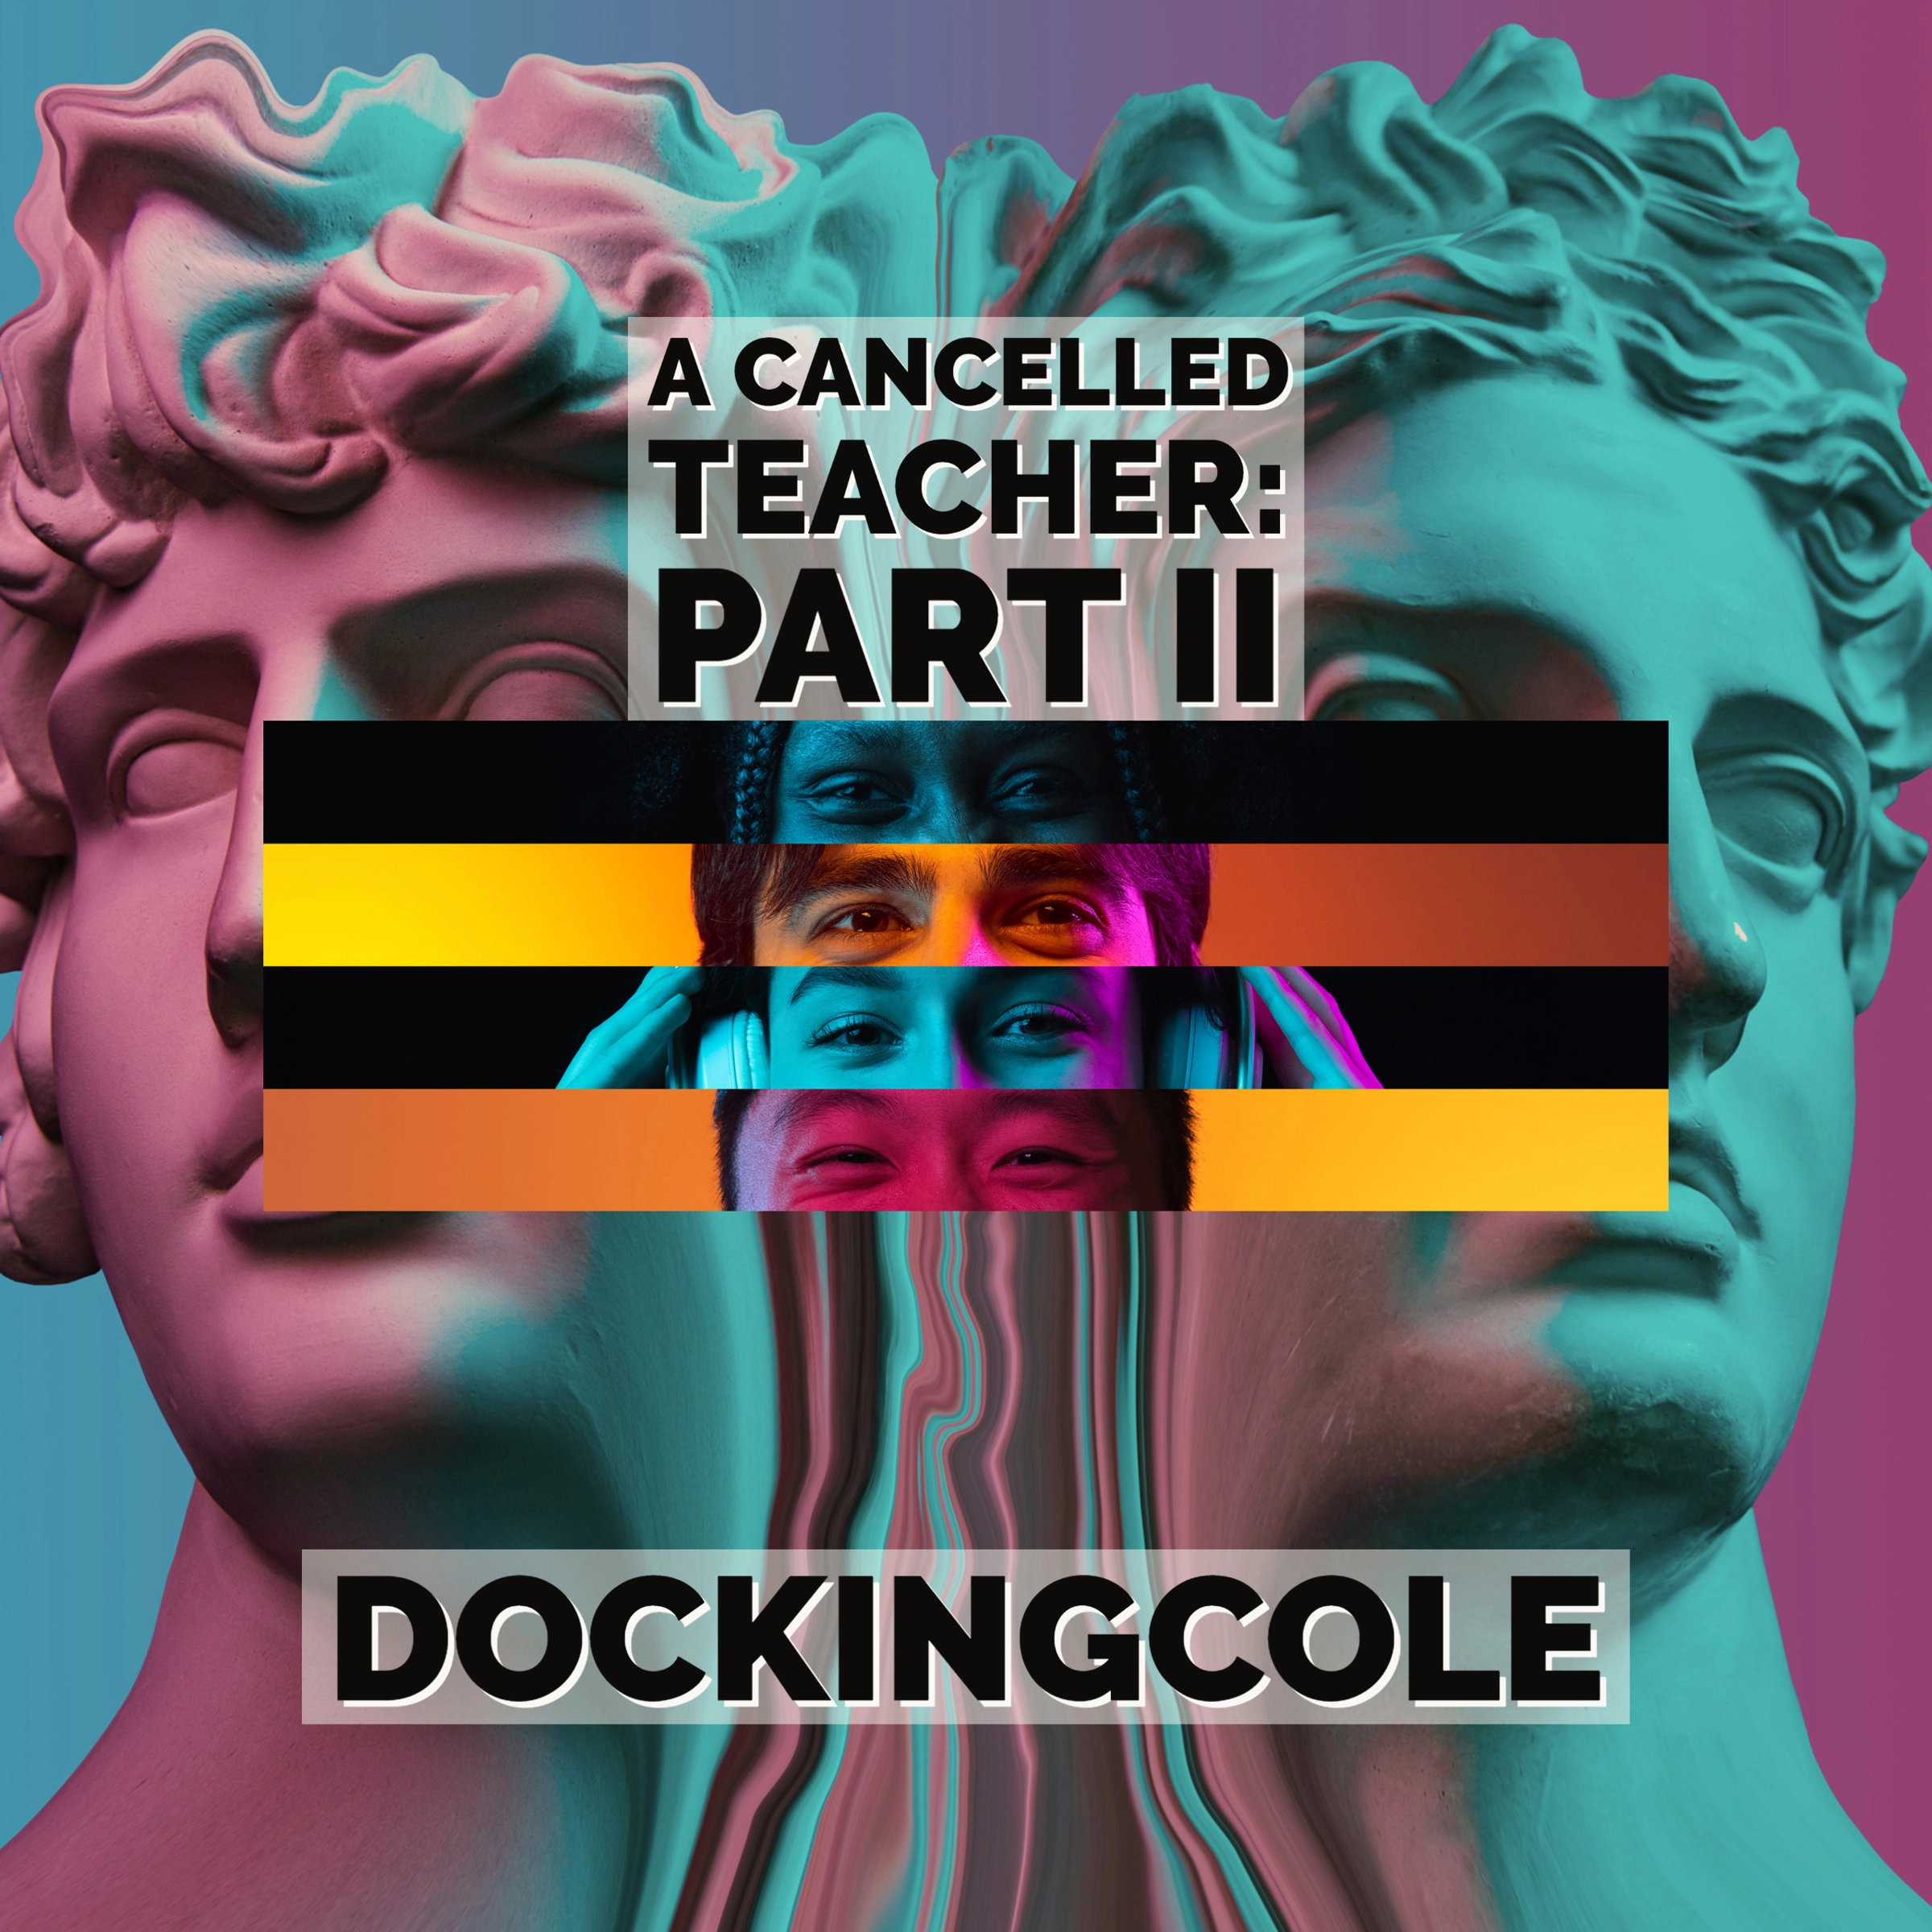 A Cancelled Teacher: Audiobook by Doc King Cole